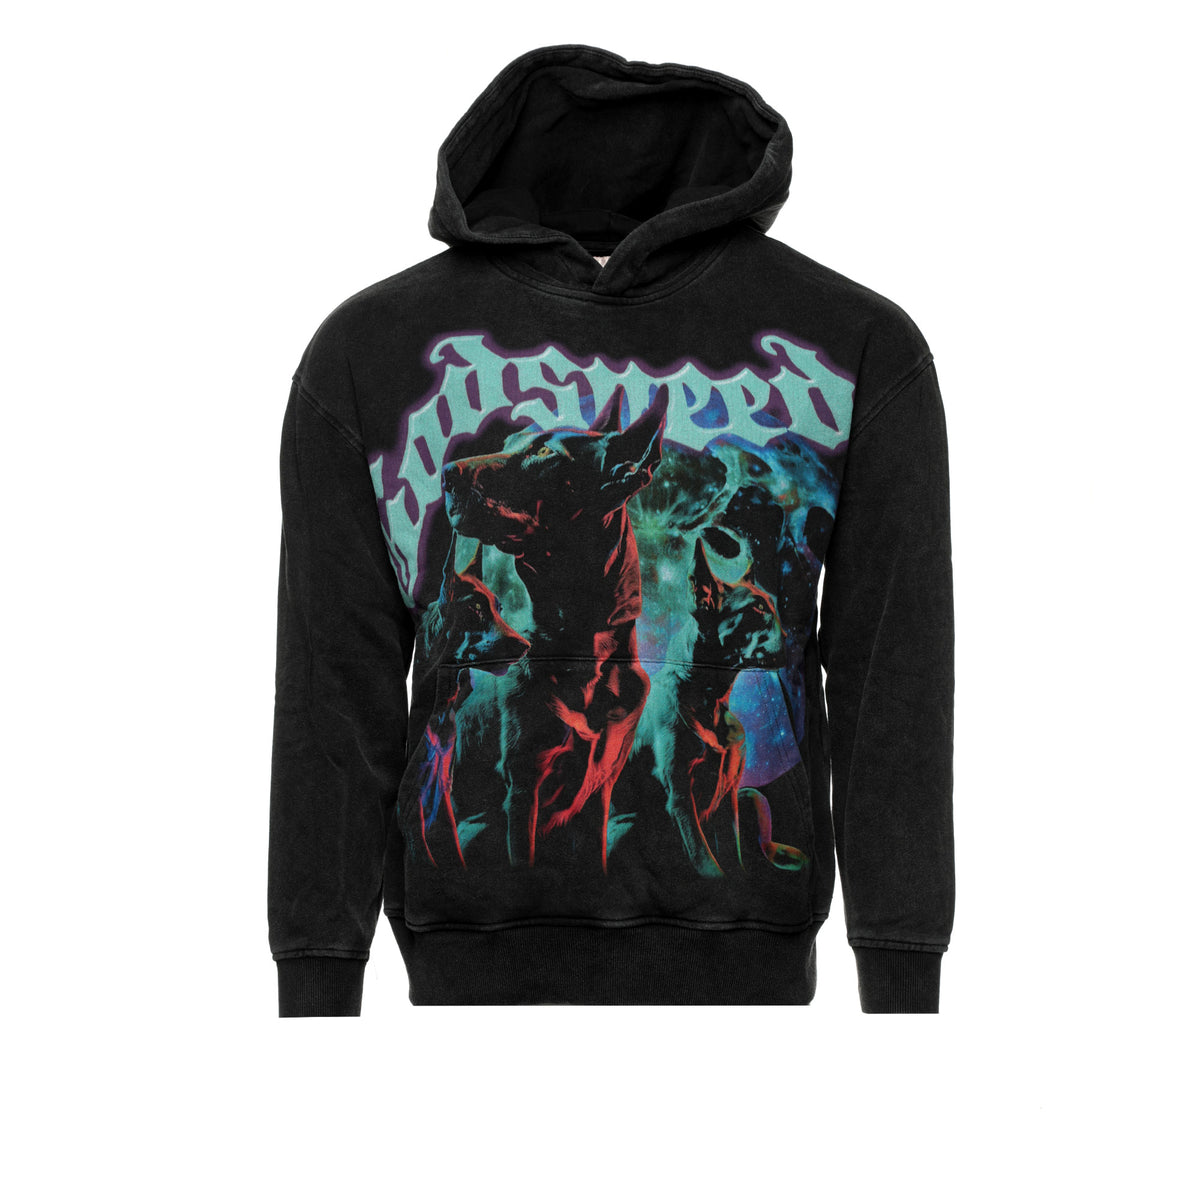 Godspeed The Pack Men's Hoodie - SIZE Boutique 